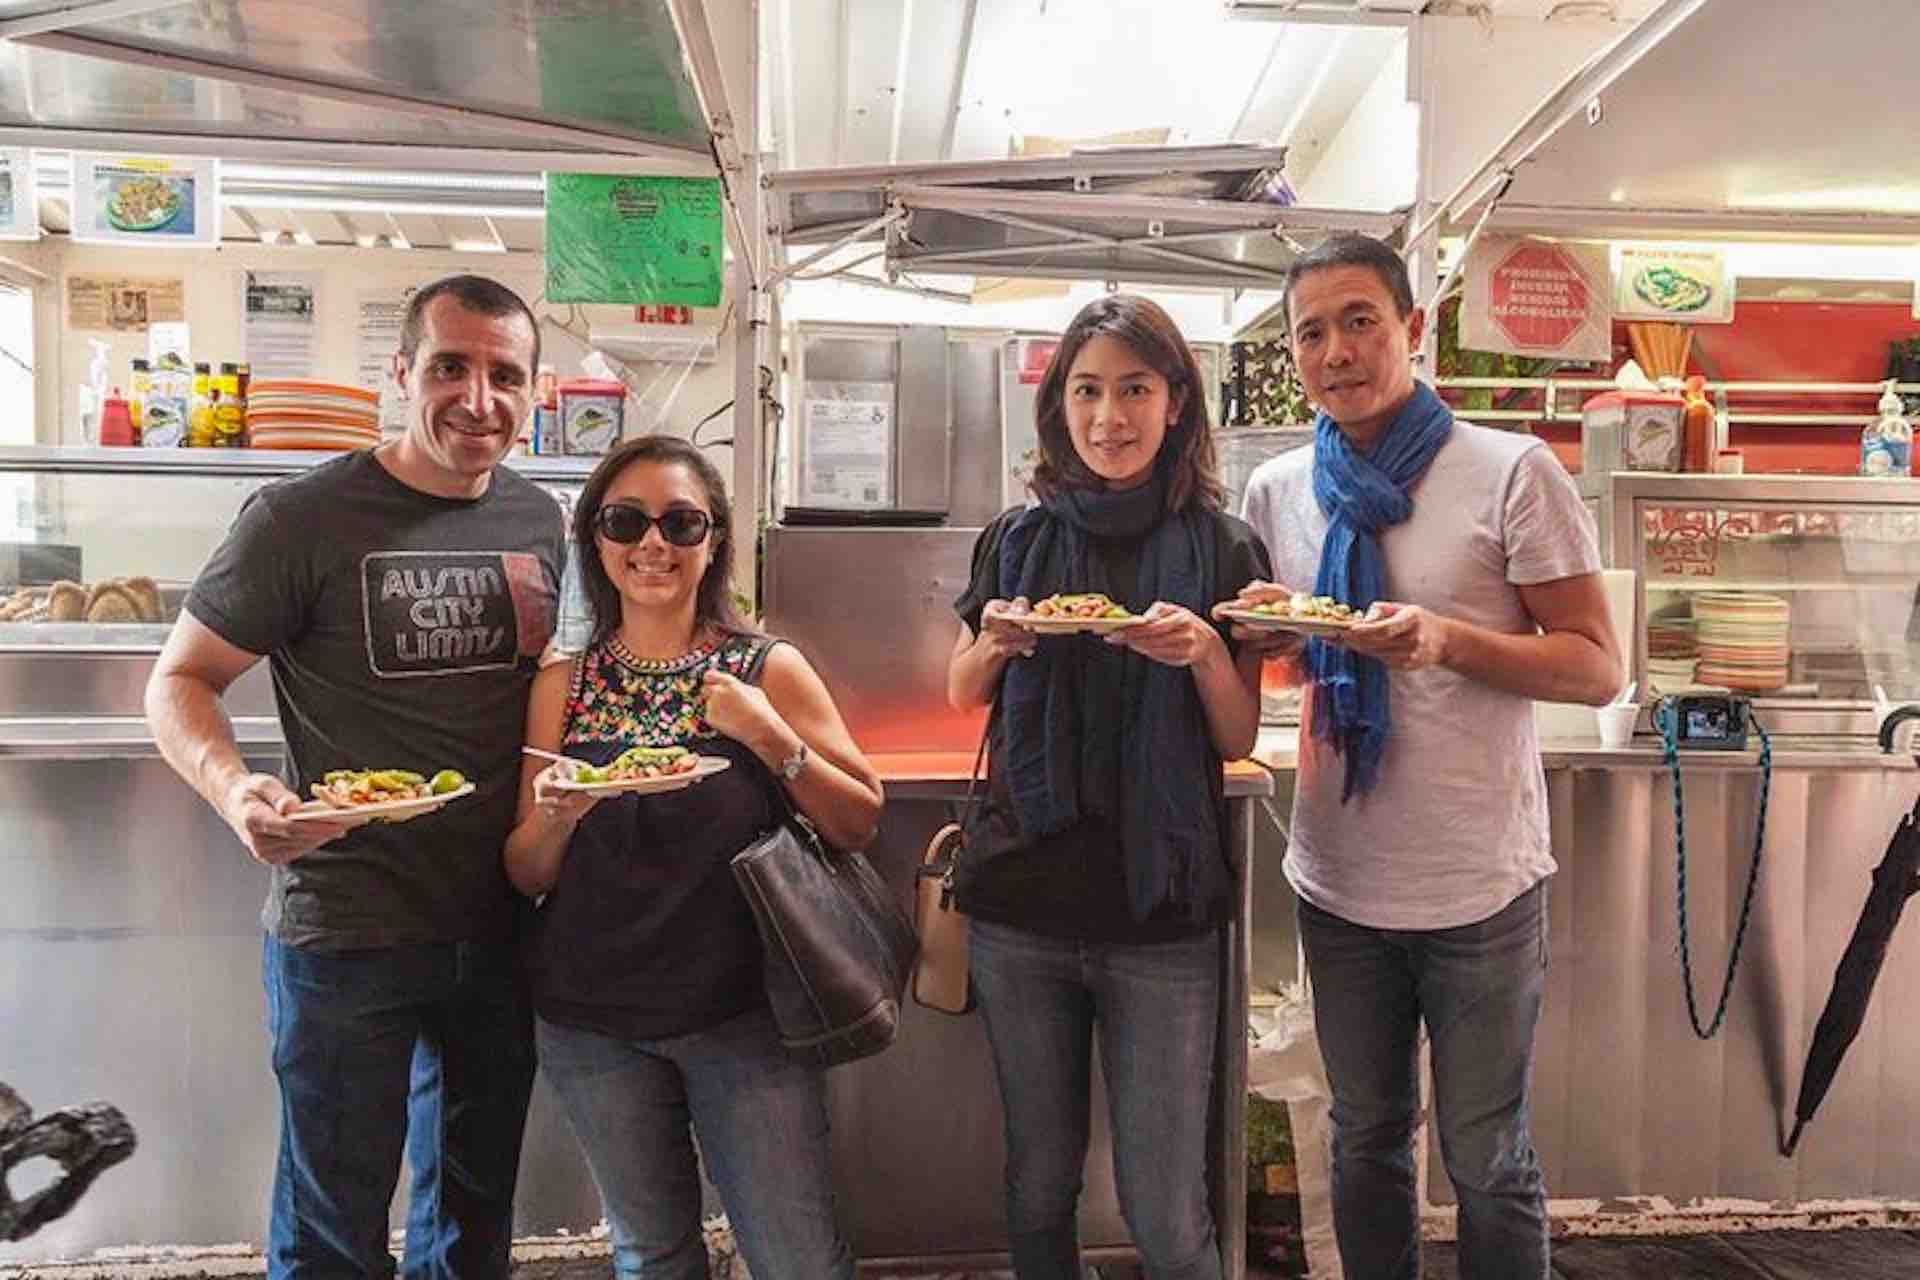 Mexico City Culinary Tour guests holding plates